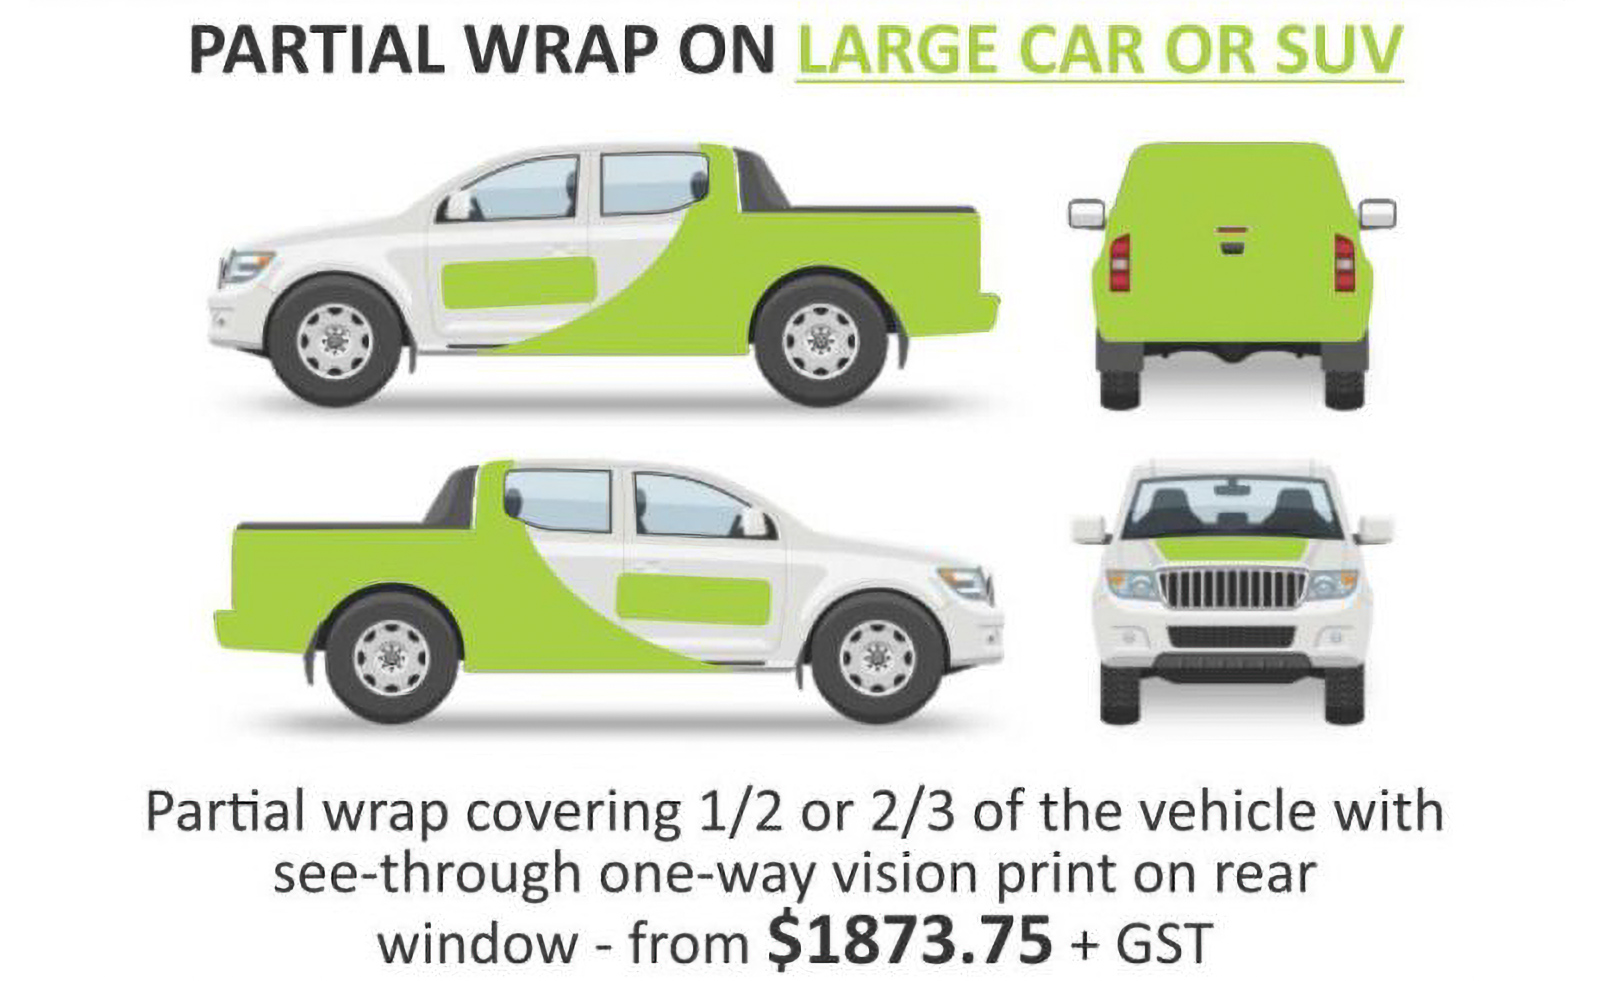 Partial wrap vehicle signage pricing for large car or suv in Newcastle